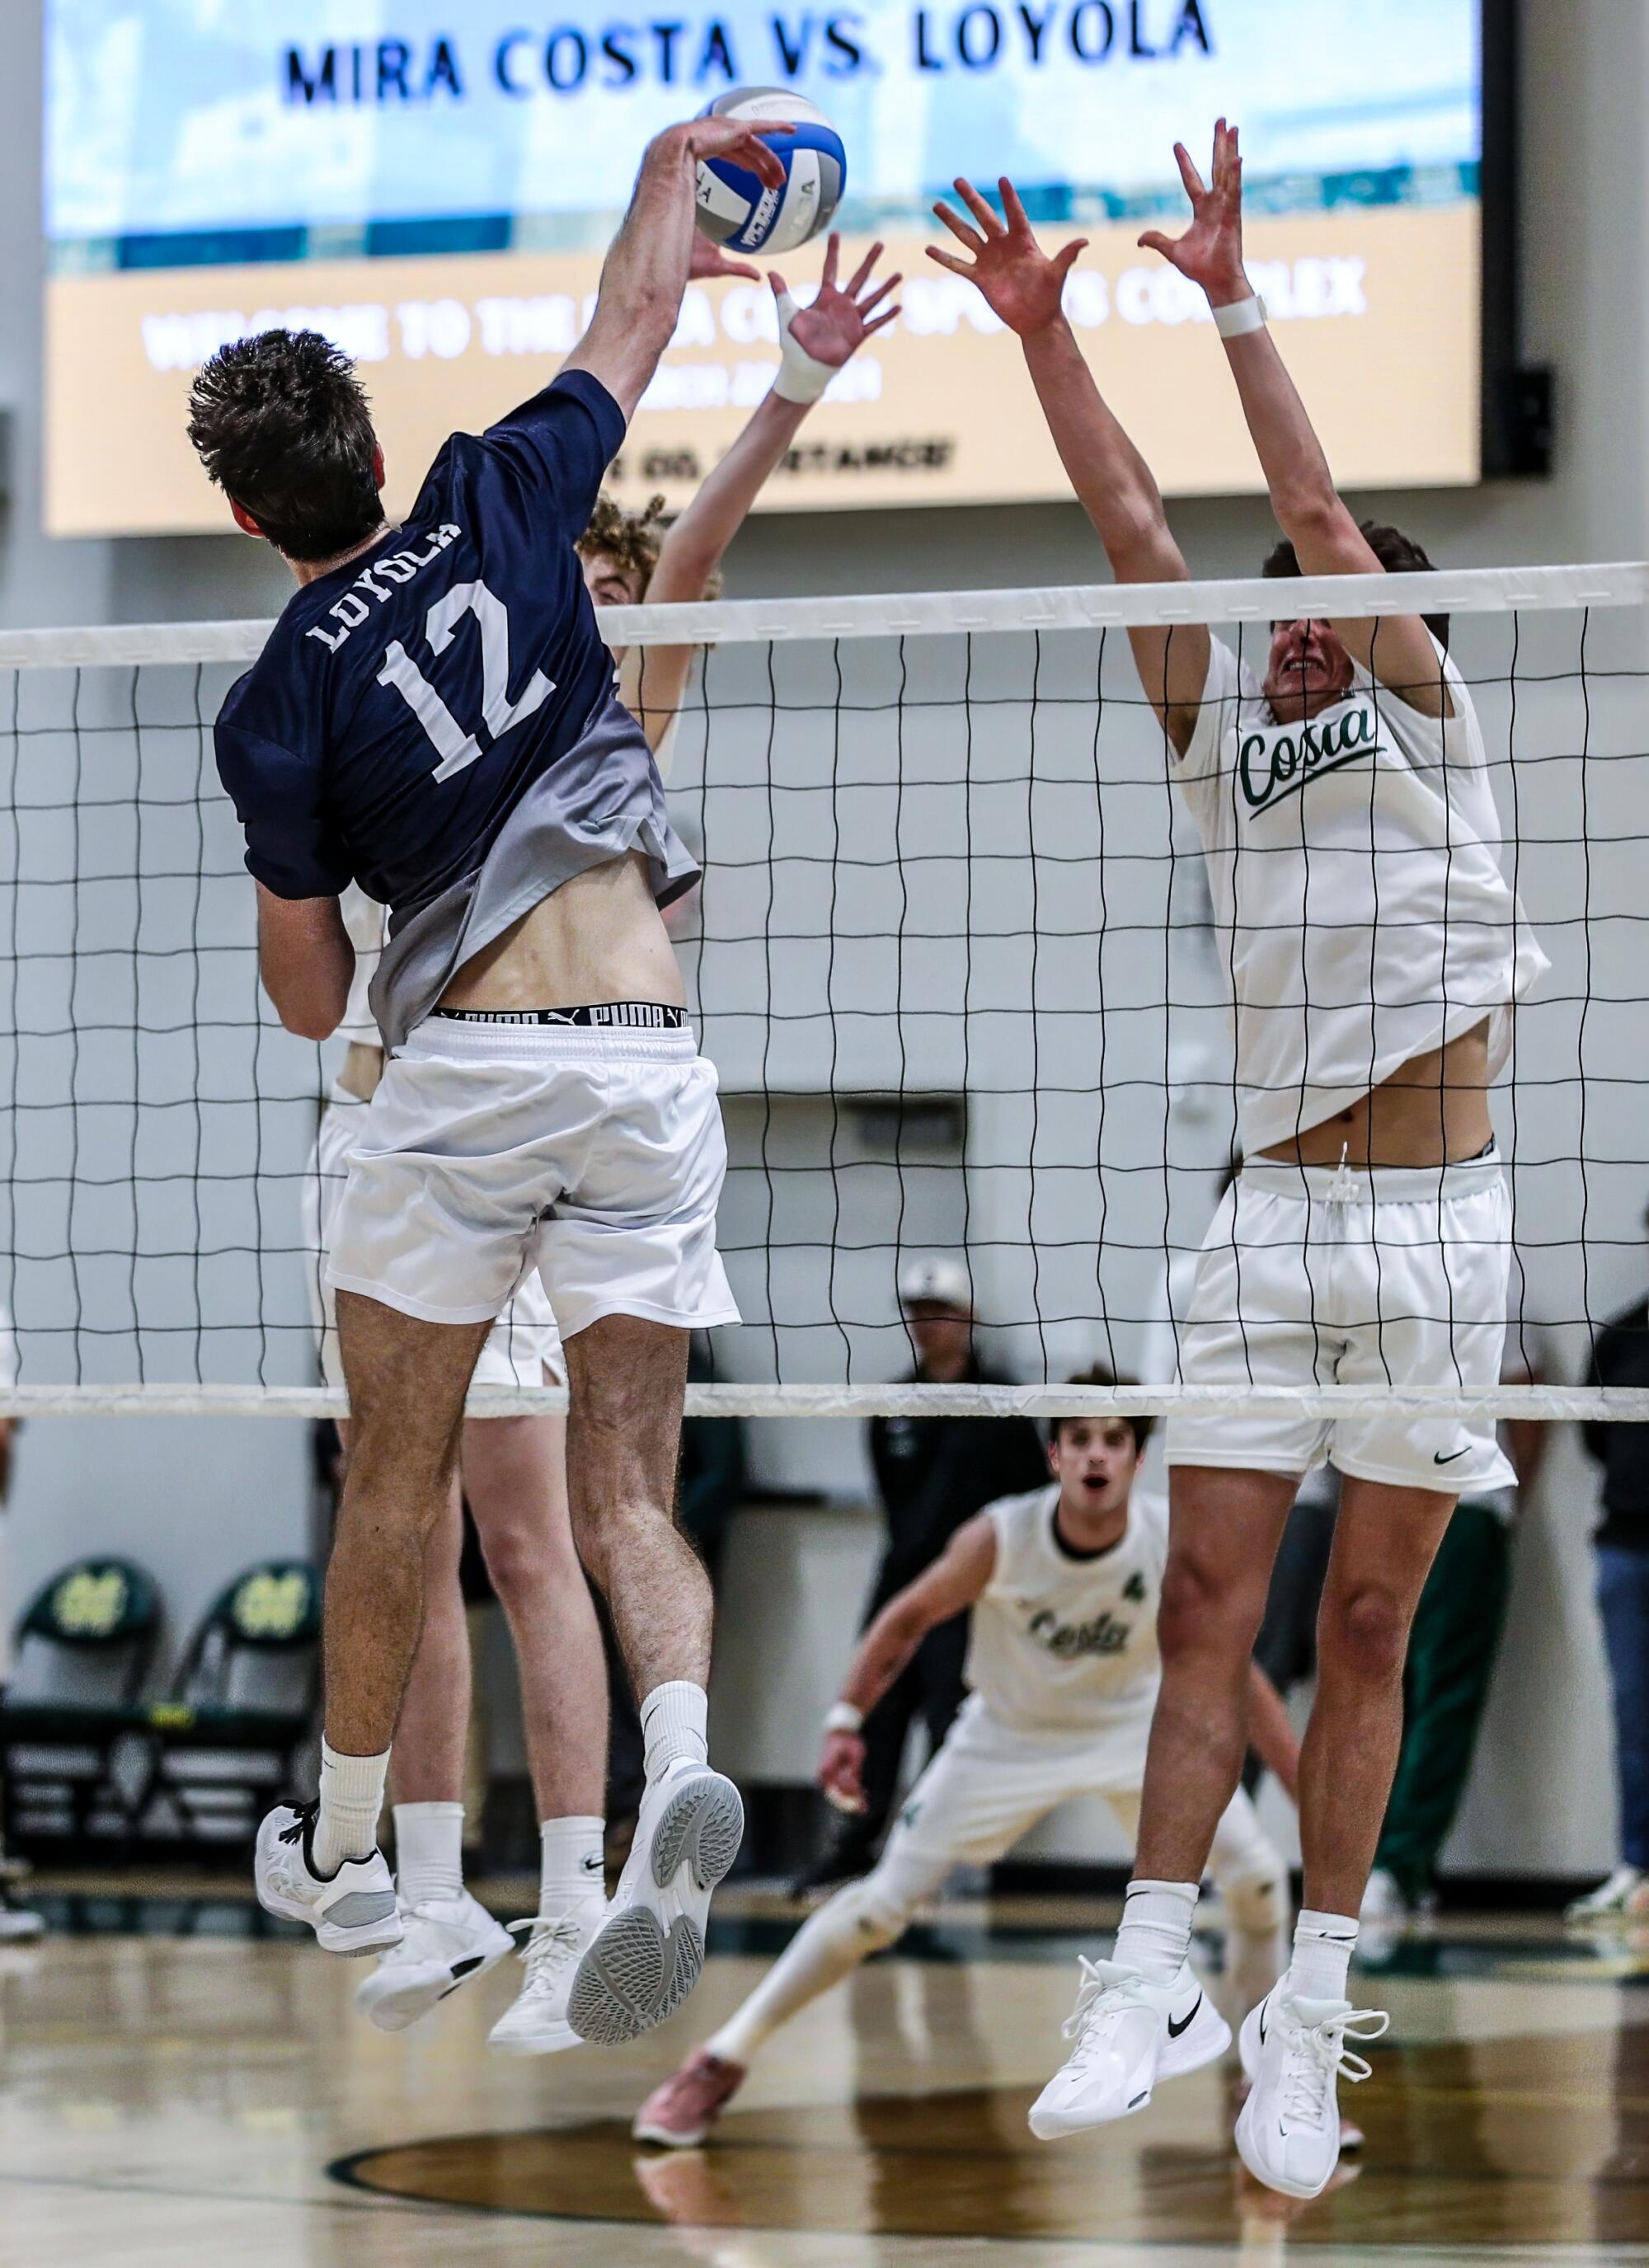 Sean Kelly of Loyola delivers one of his 30 kills in win over Mira Costa.